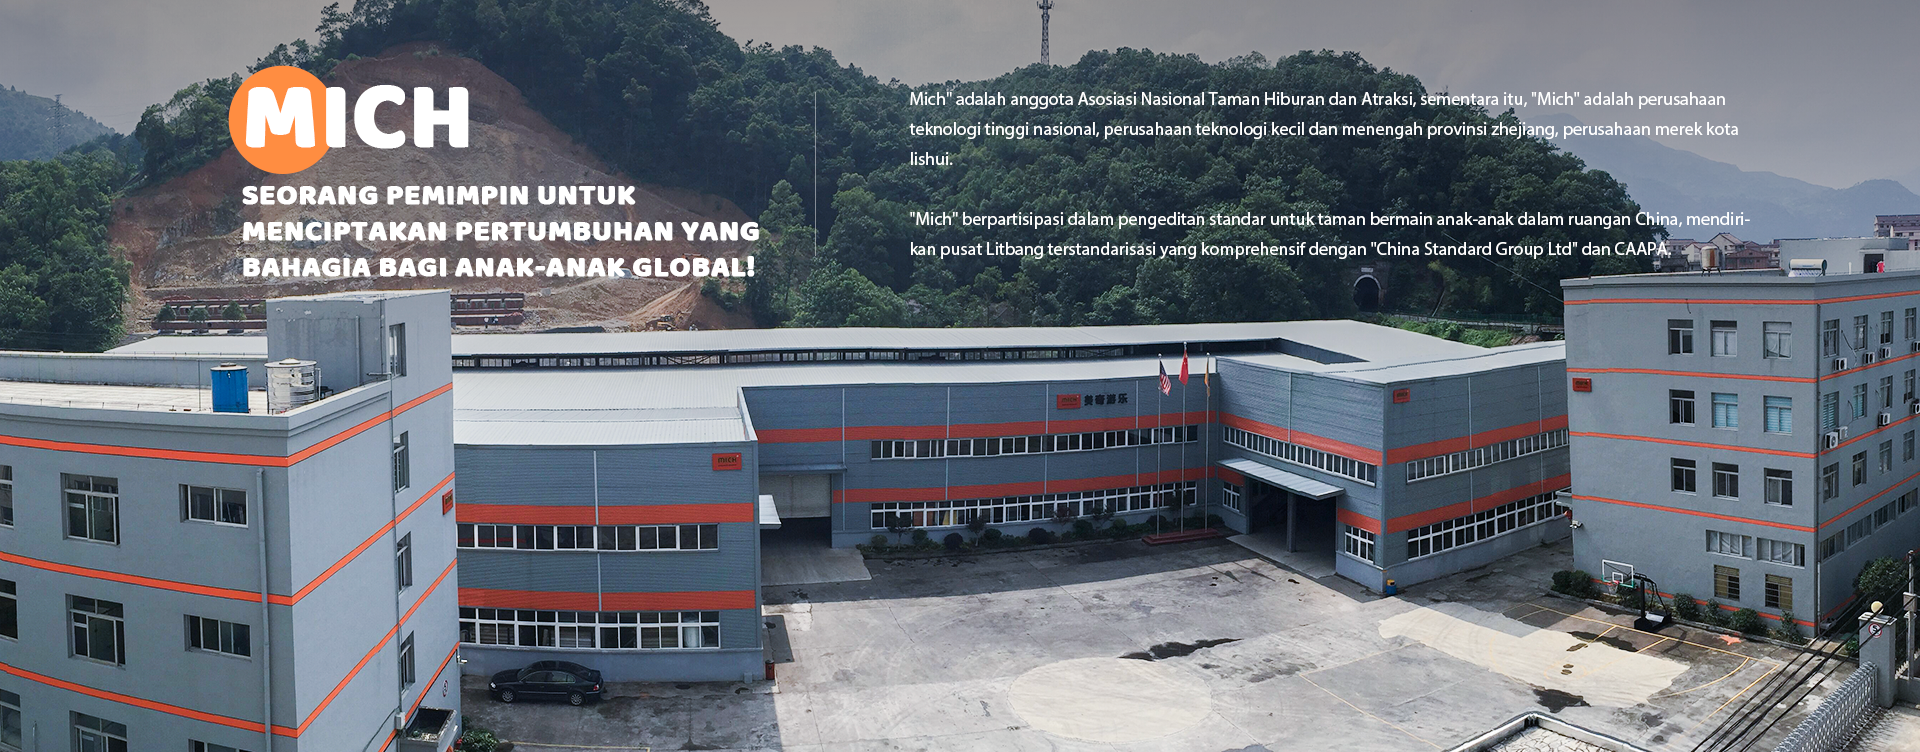 Exterior view of the playground supplier company, a leader to create happy growth for global children, showcasing its commitment to providing quality play equipment.